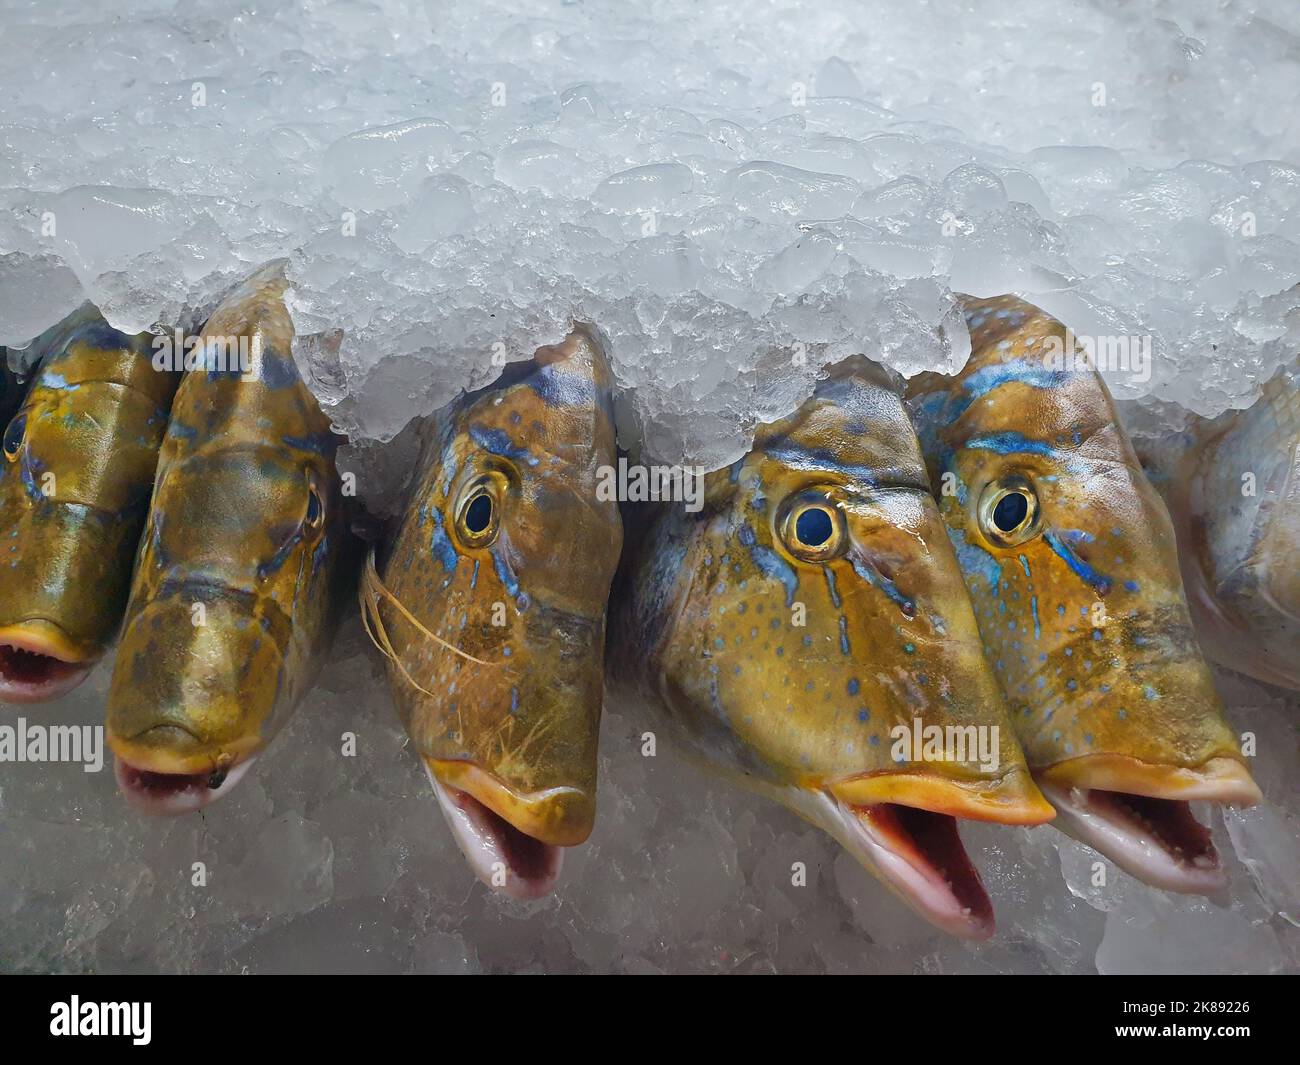 Fresh sea fish with open mouths in a tray with ice, Red Sea, Egypt Stock Photo